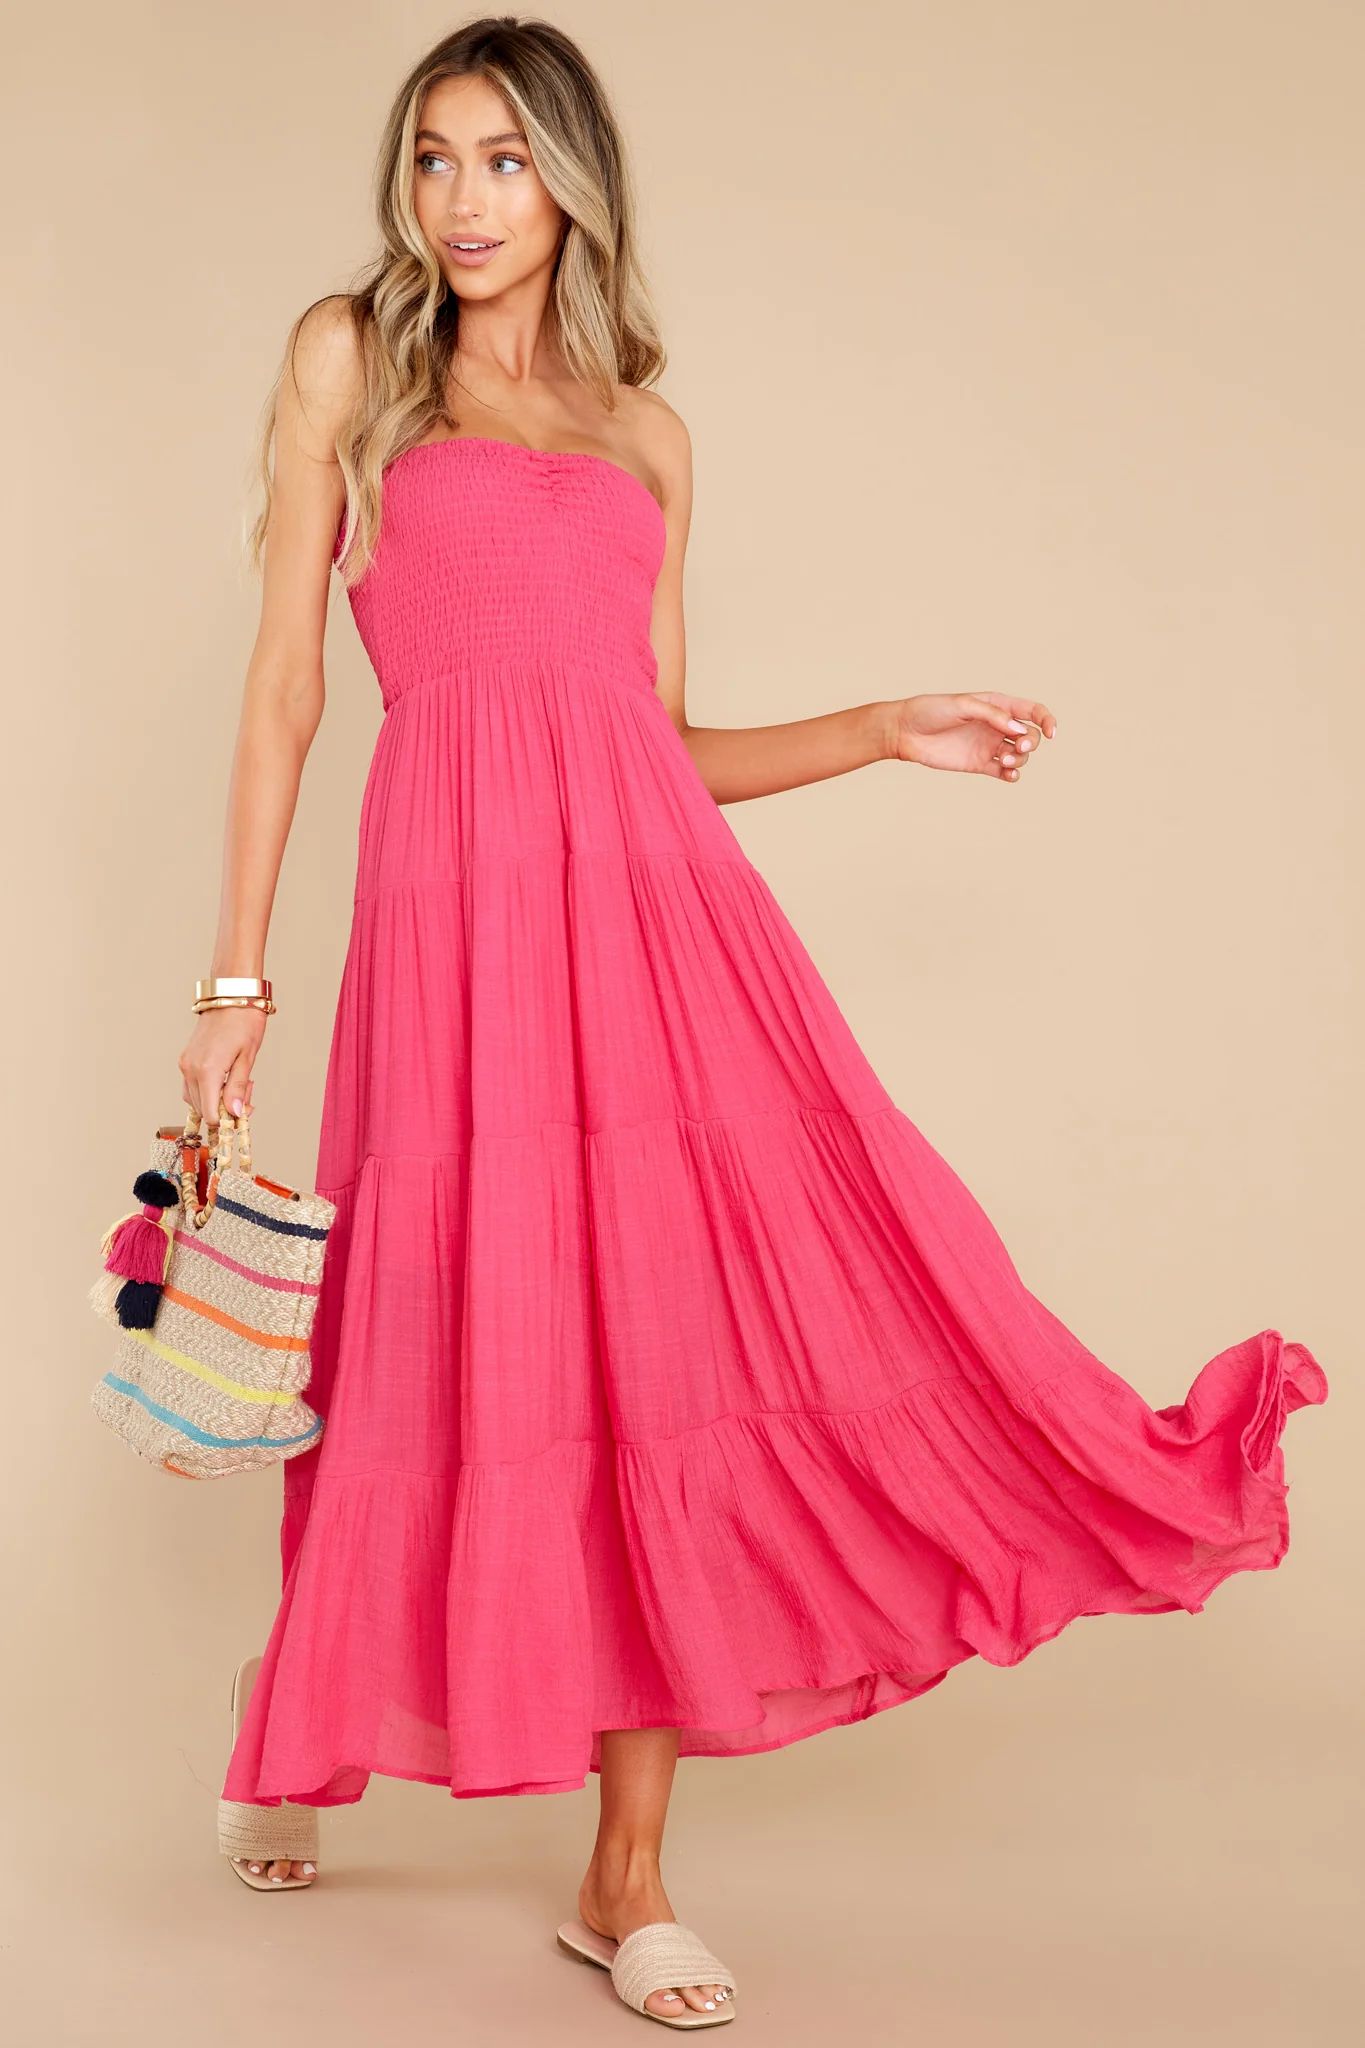 Pretty And Poised Fuchsia Pink Maxi Dress | Red Dress 